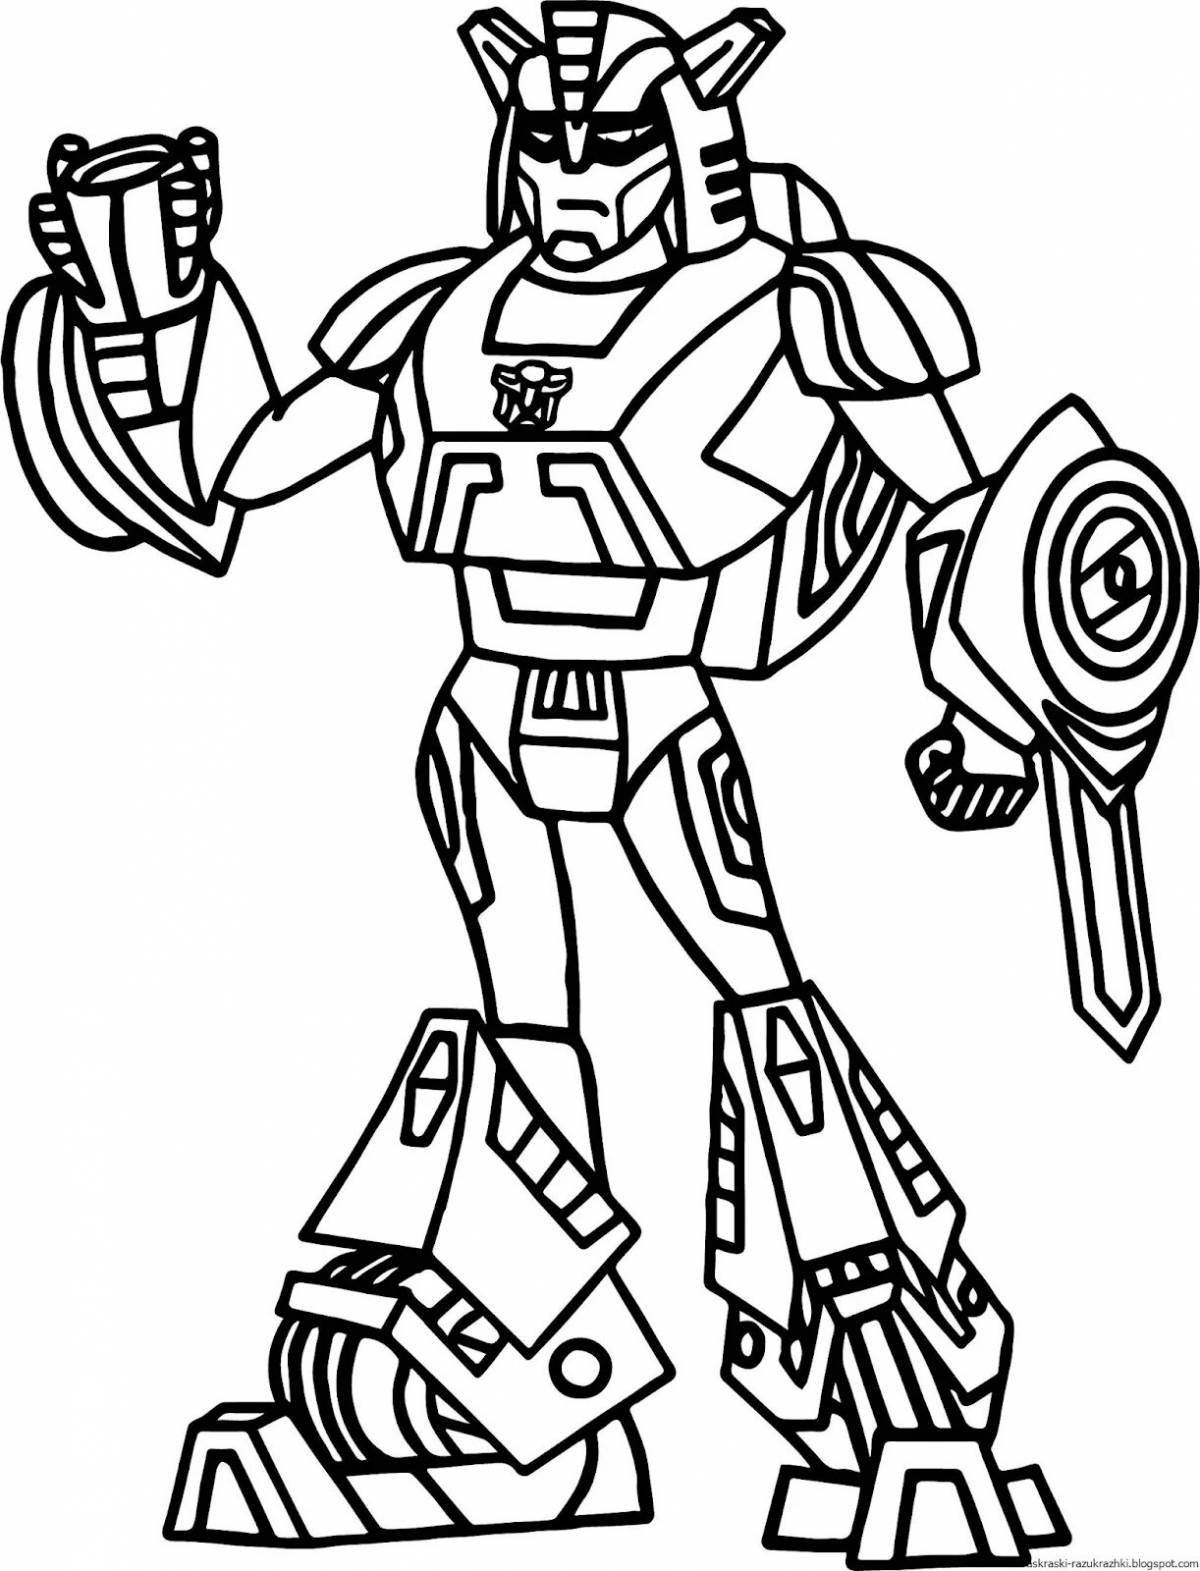 Coloring page adorable robot with siren head